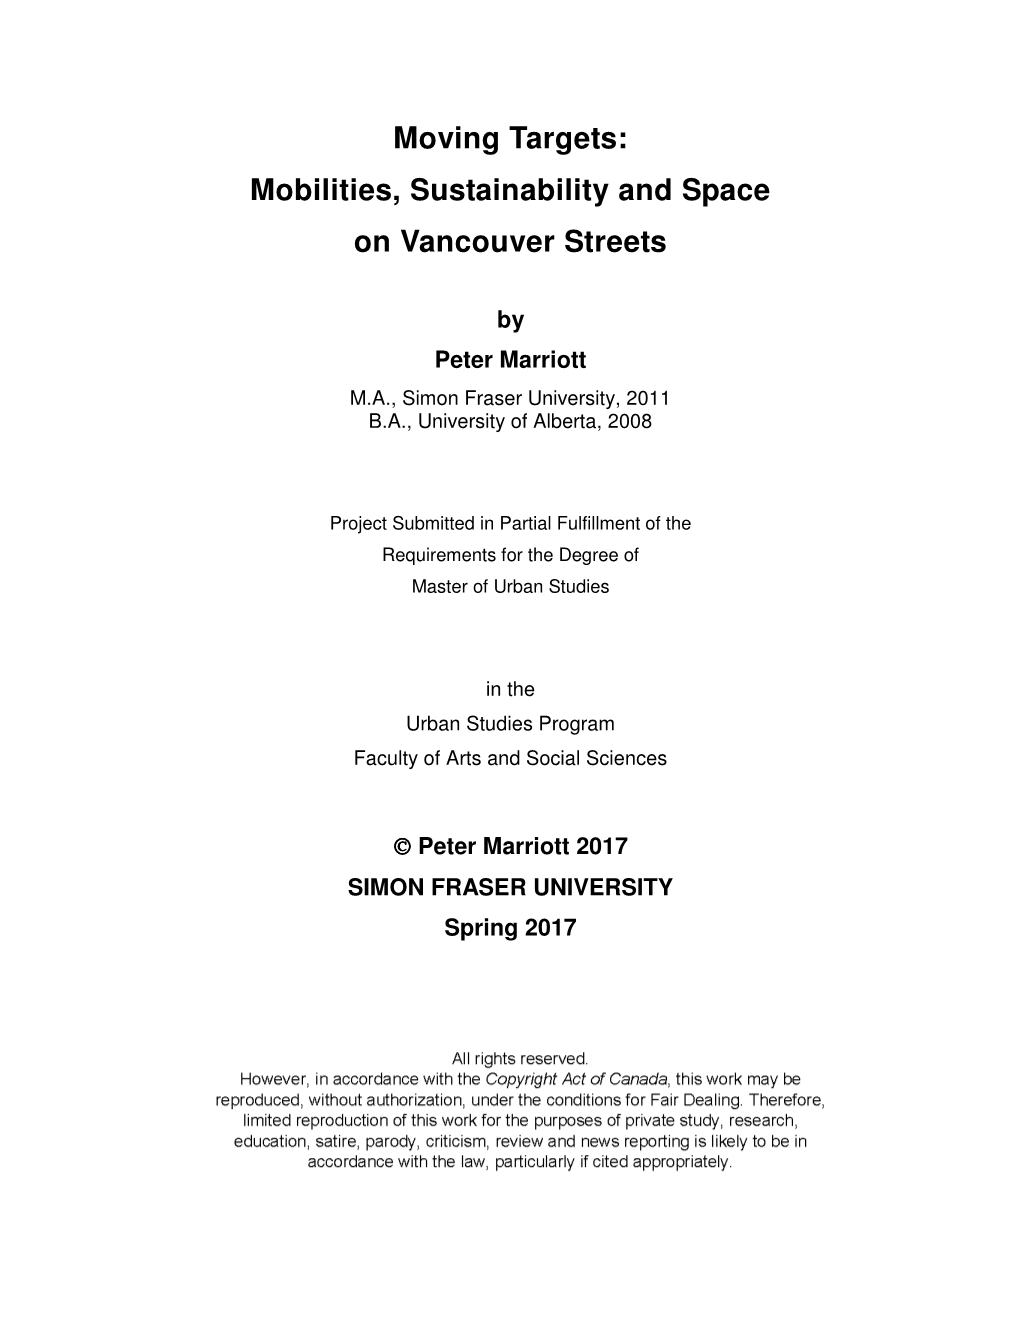 Mobilities, Sustainability and Space on Vancouver Streets